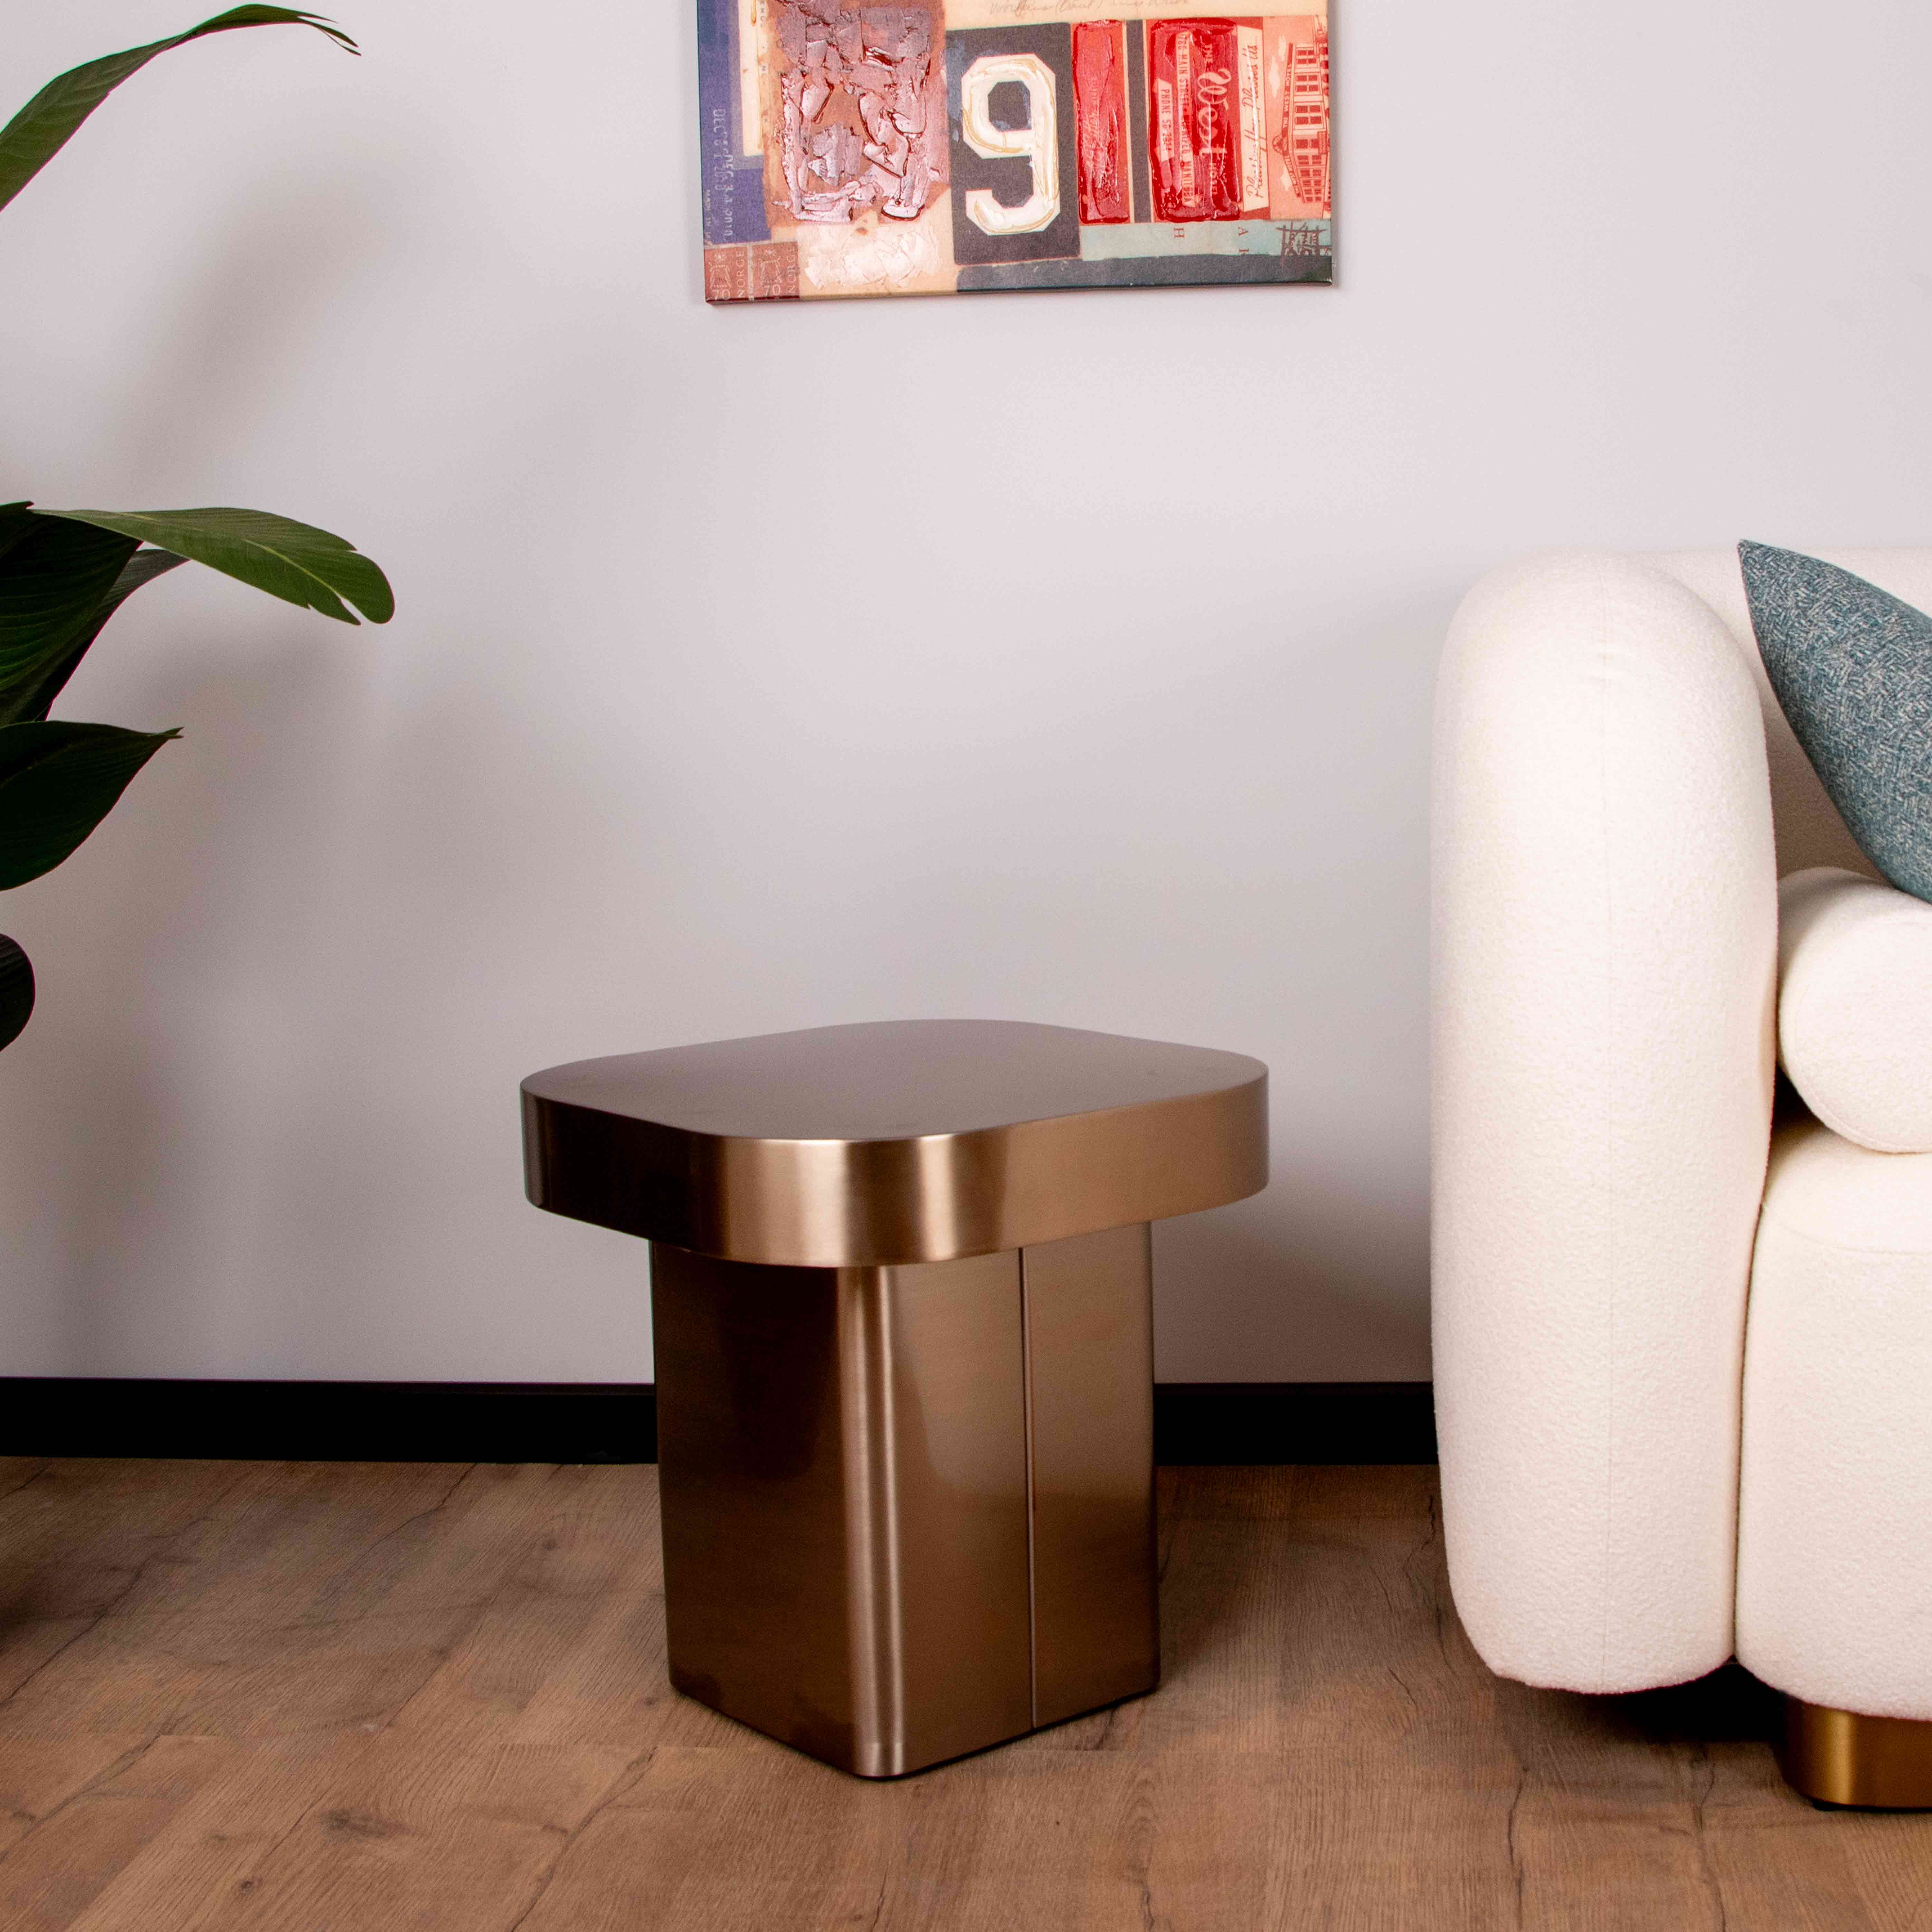 CJ966A SIDE TABLE GOLD